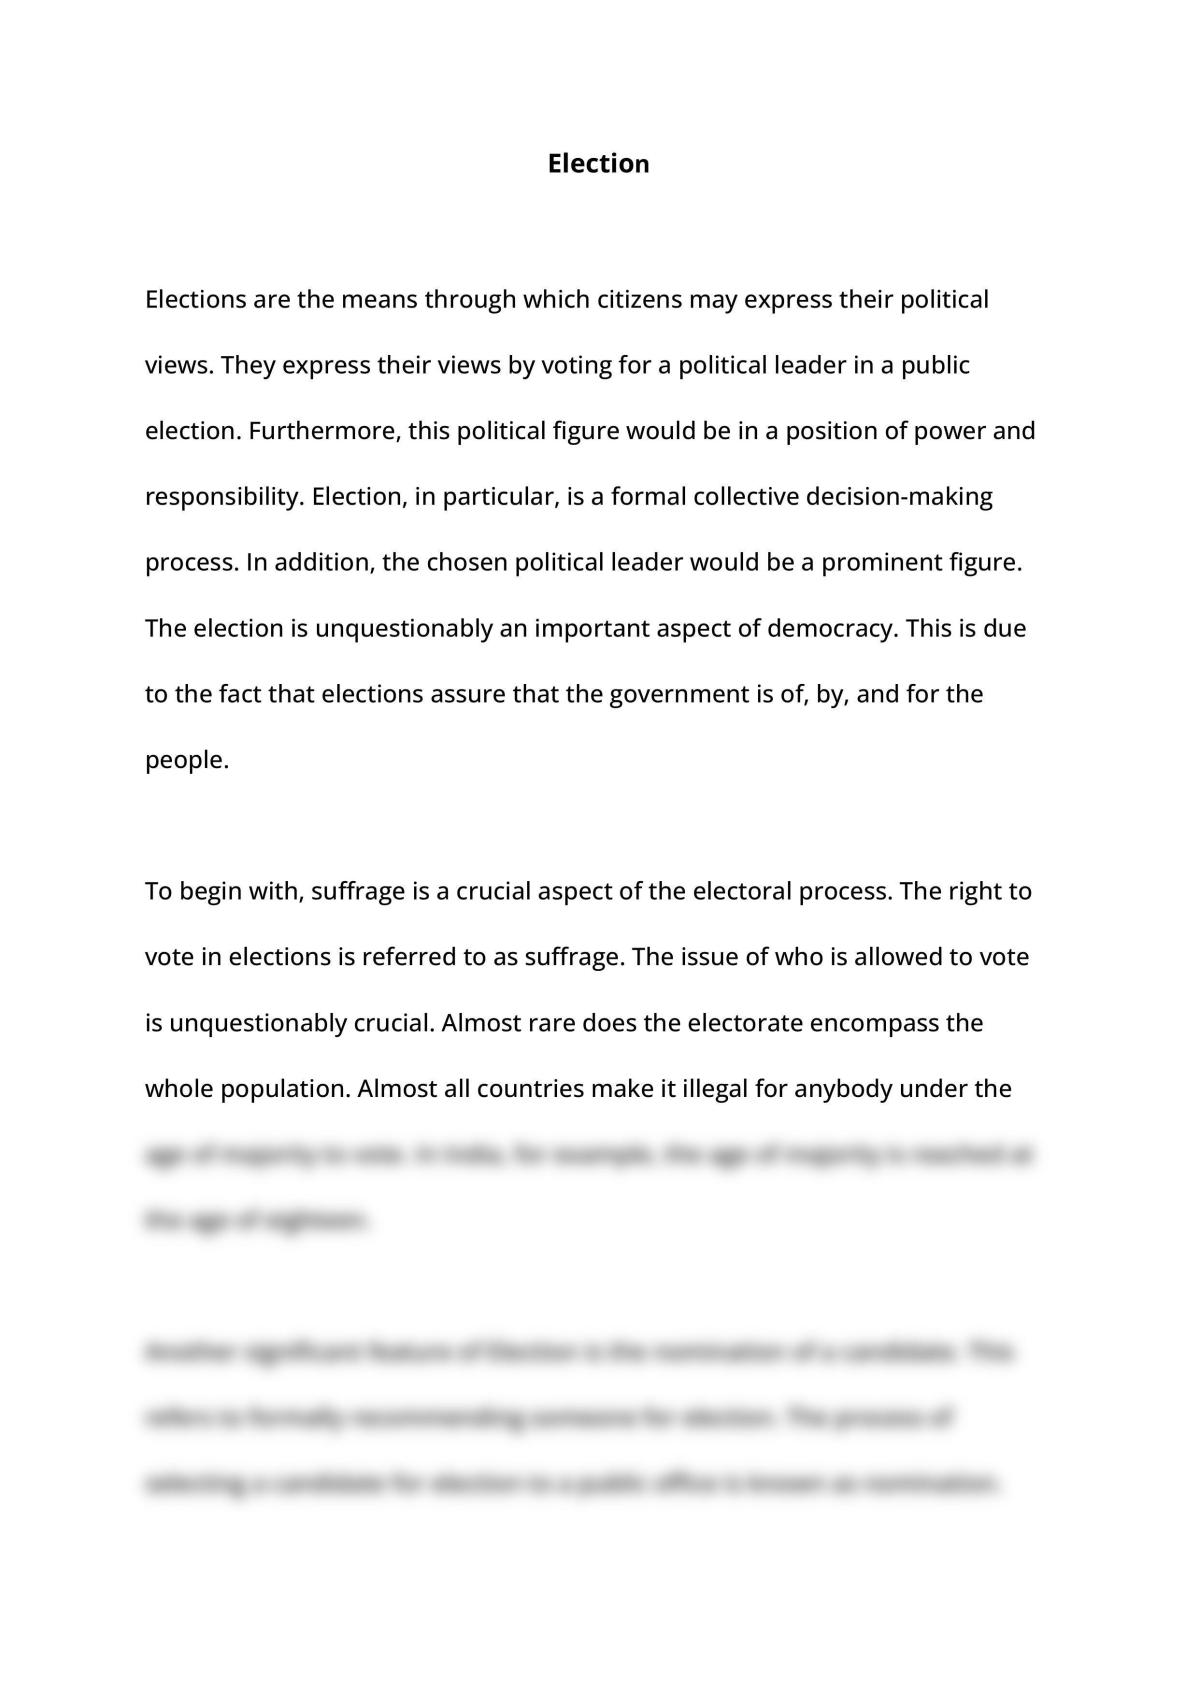 reflection essay about election 2022